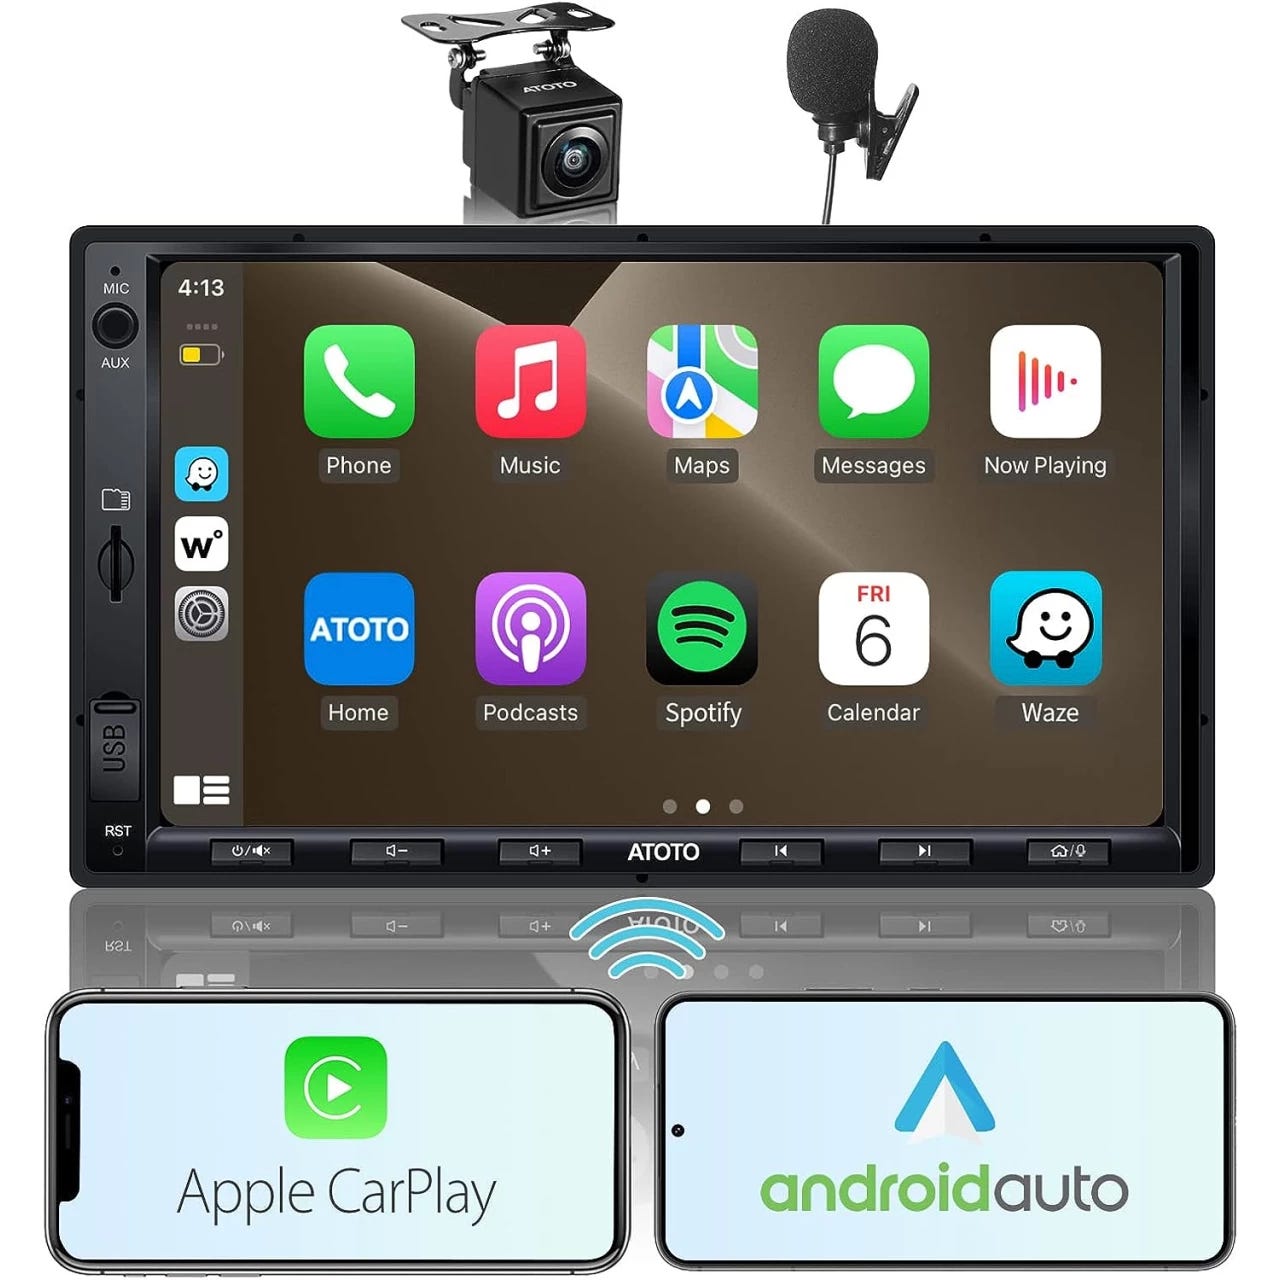  Westods Portable Wireless Carplay Car Stereo with 2.5K Dash Cam  - 9.3 HD IPS Screen, Android Auto, 1080p Backup Camera, Loop Recording,  Bluetooth, GPS Navigation Head Unit, Car Radio Receiver 